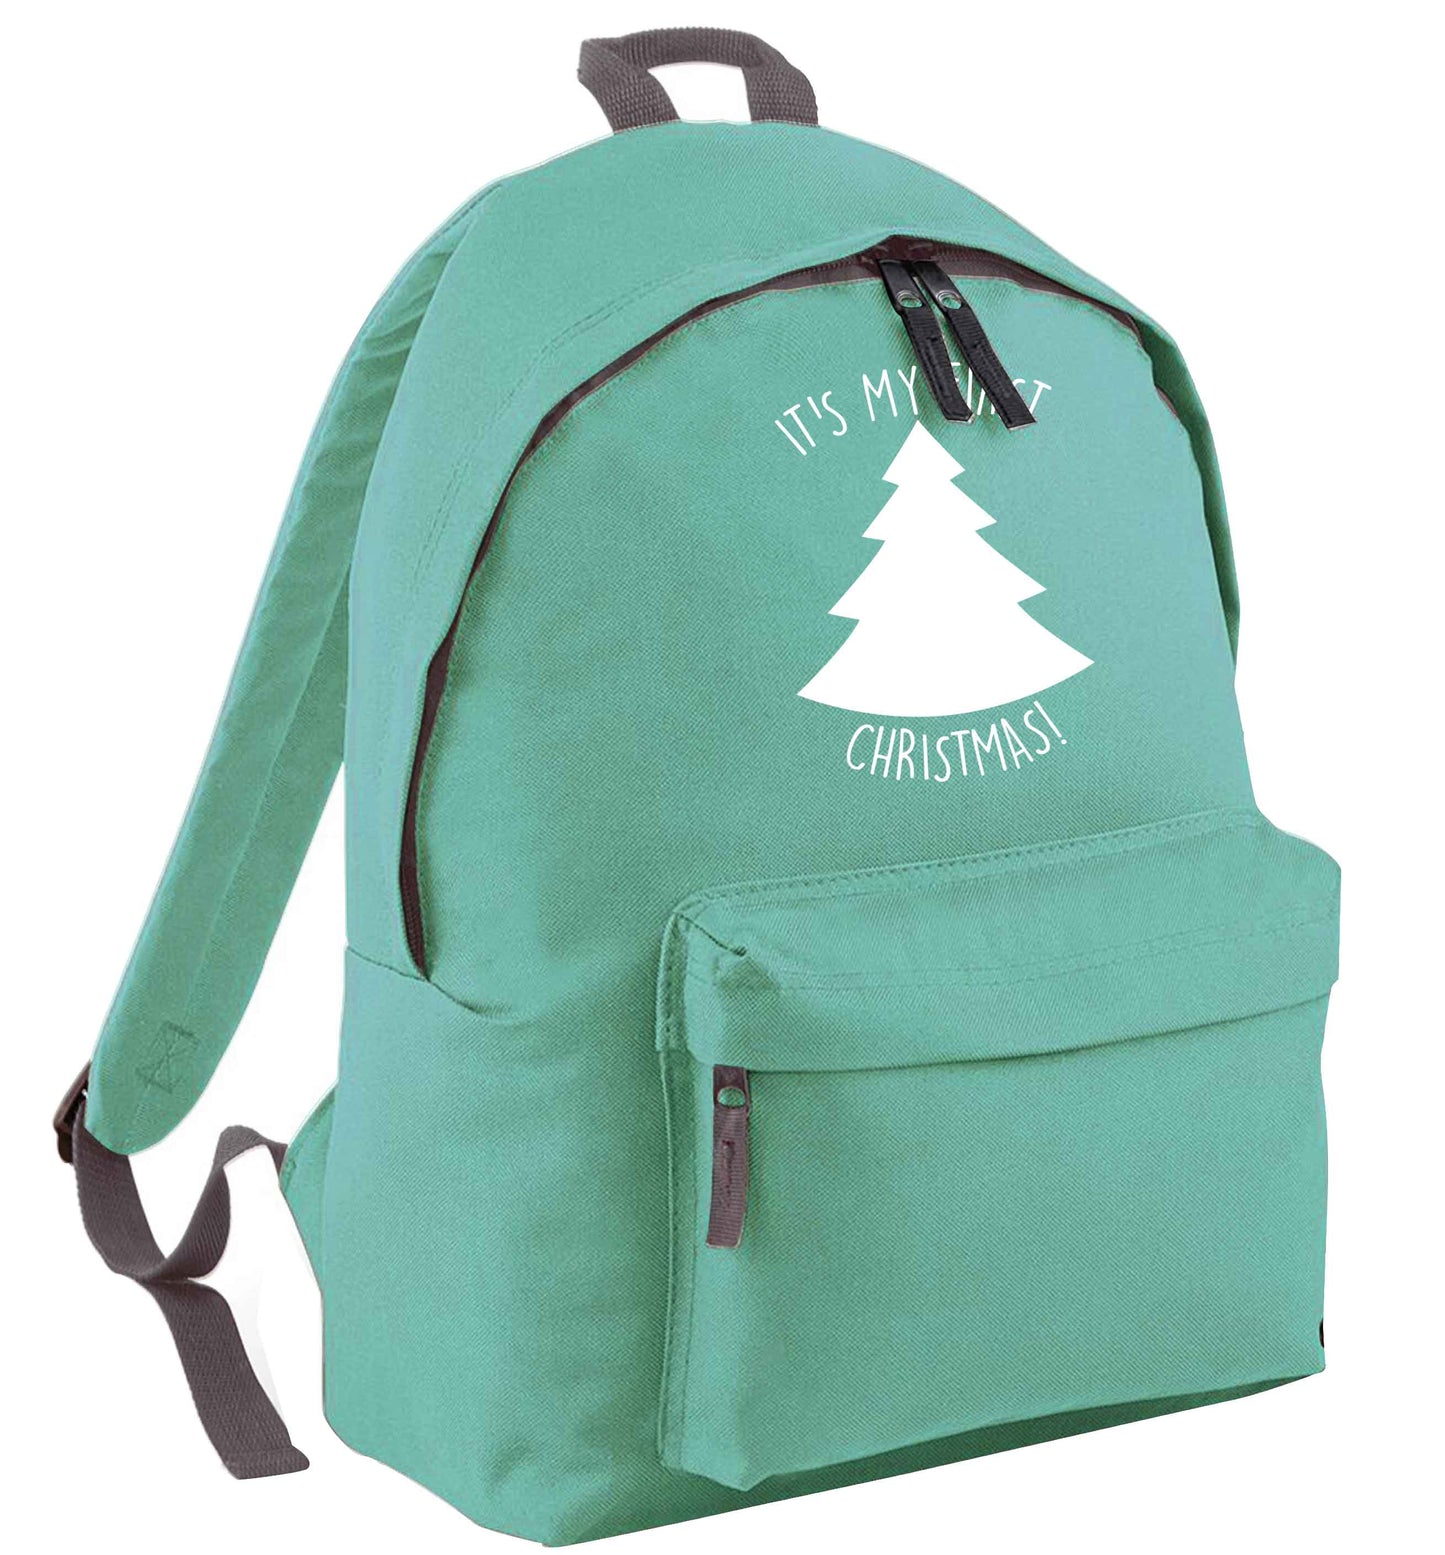 It's my first Christmas - tree mint adults backpack